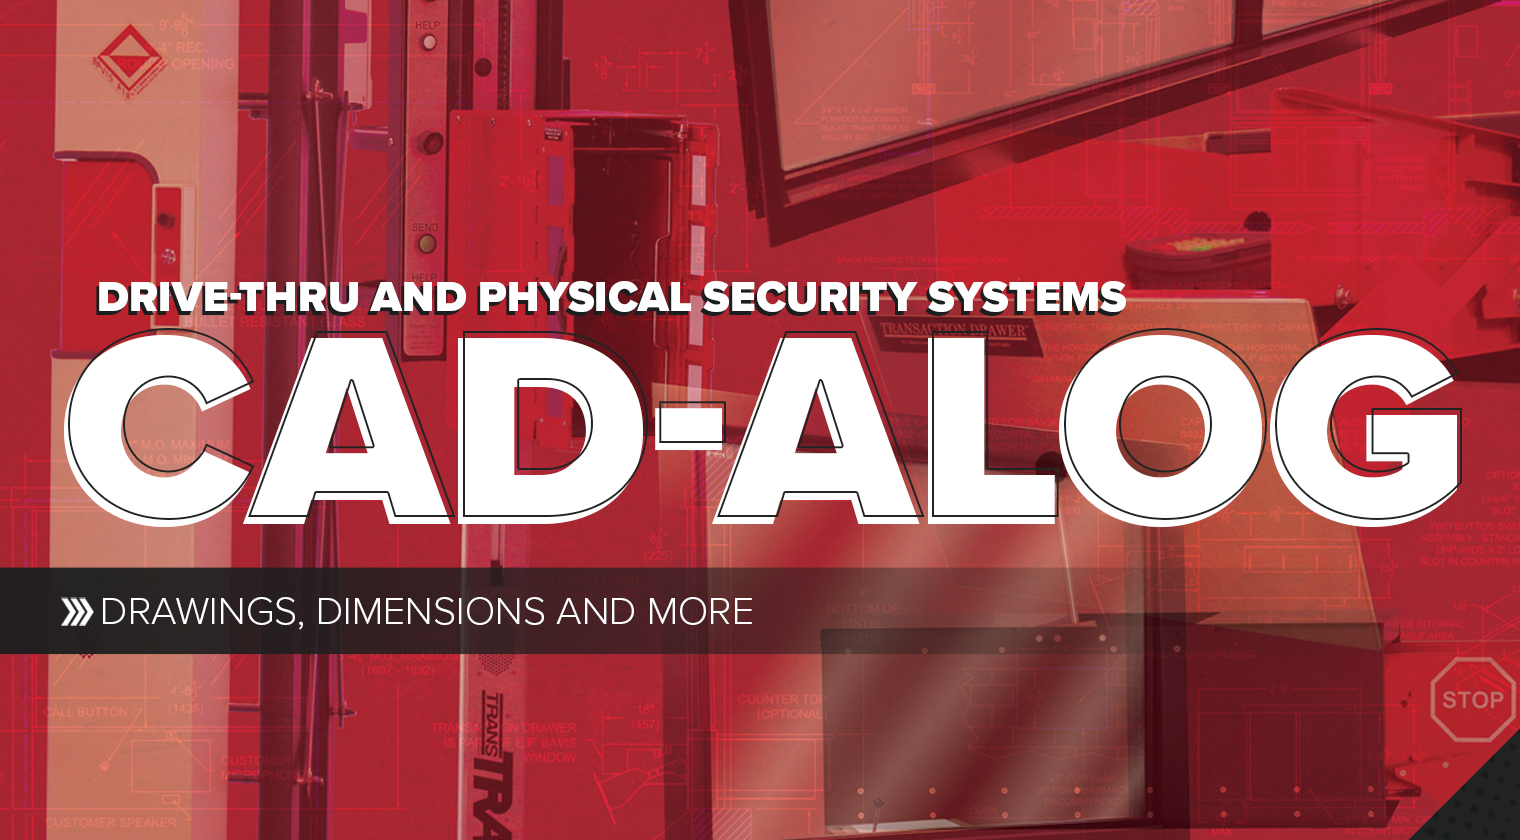 CAD-alog - Product drawings for drive-thru and physical security systems